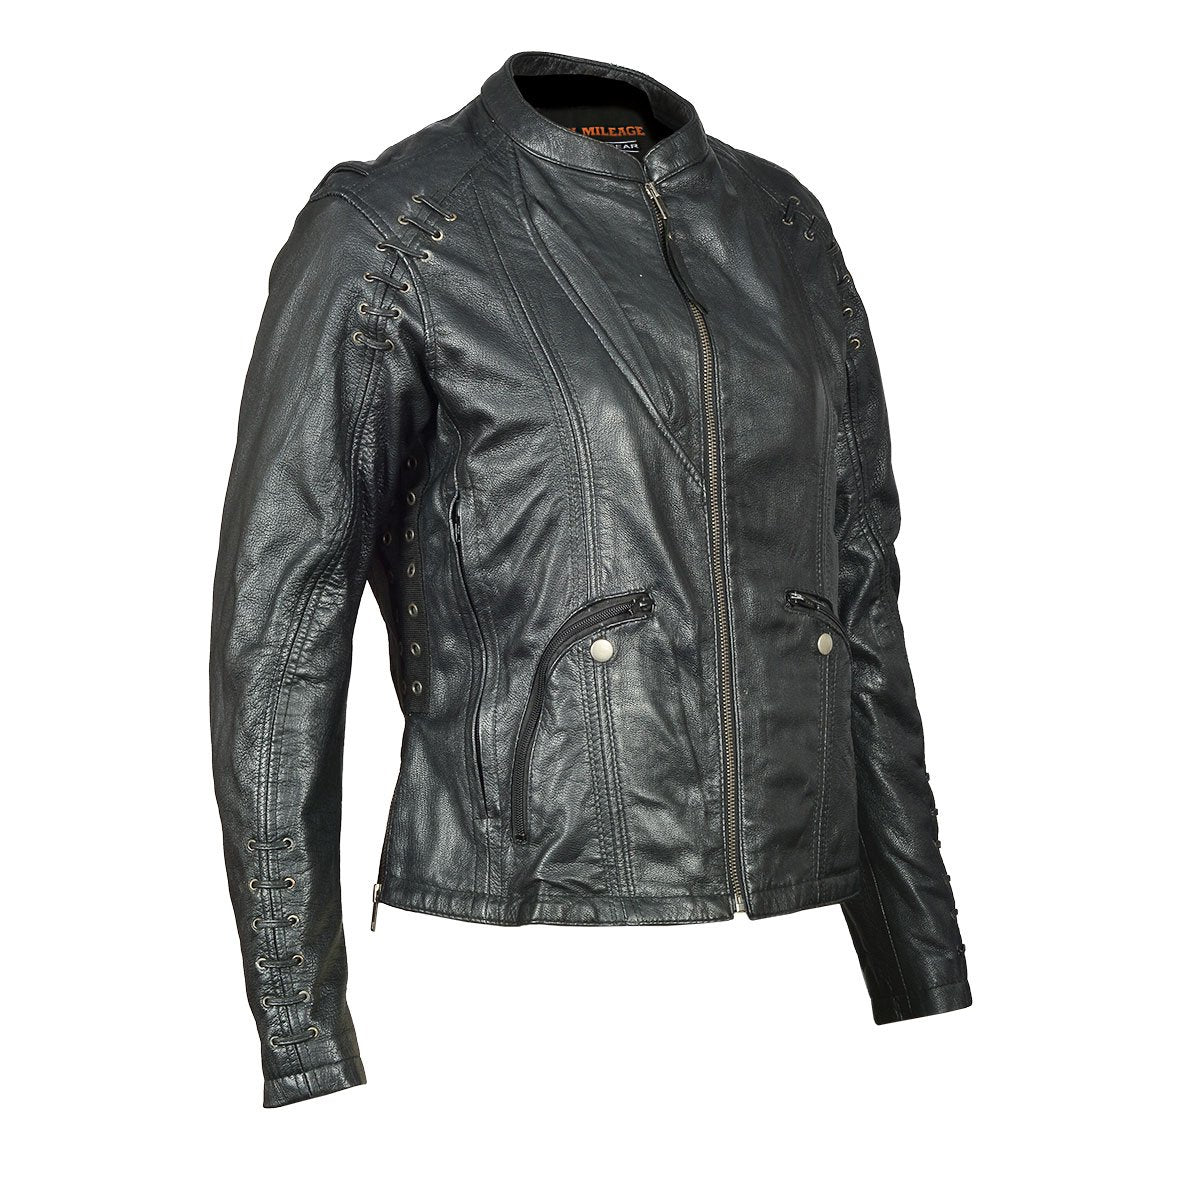 Vance Leather High Mileage Ladies Lightweight Black Goatskin Jacket w/ Grommeted Twill and Lace Highlights